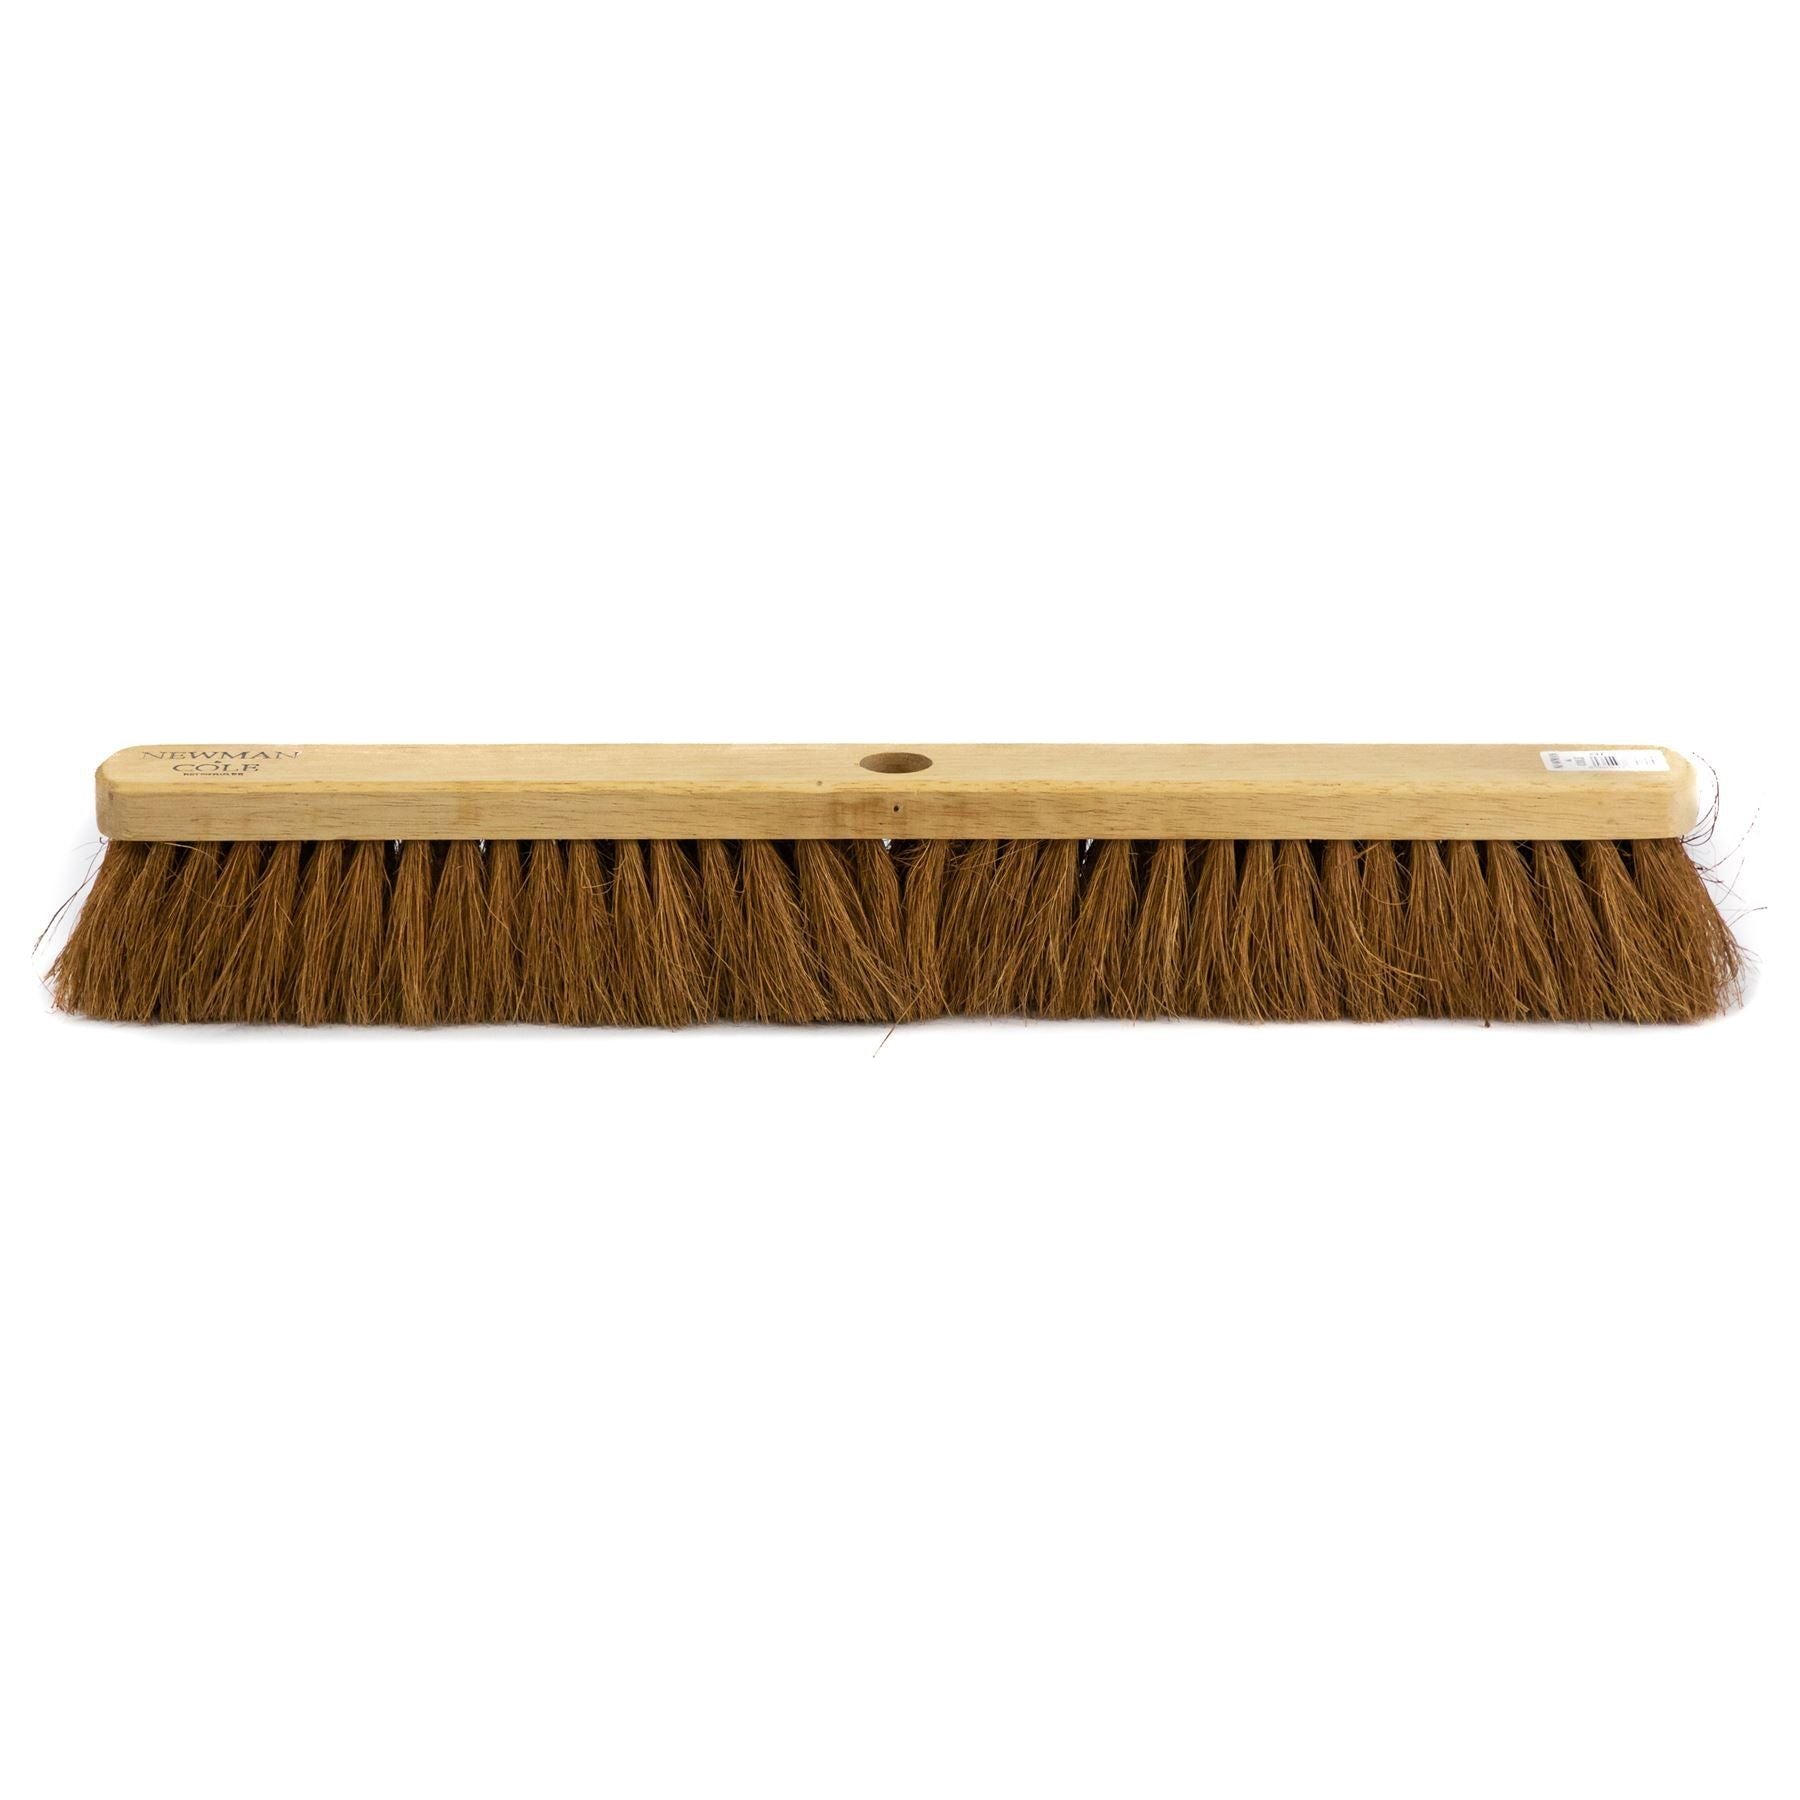 24" Newman and Cole Natural Coco Broom Head with Hole